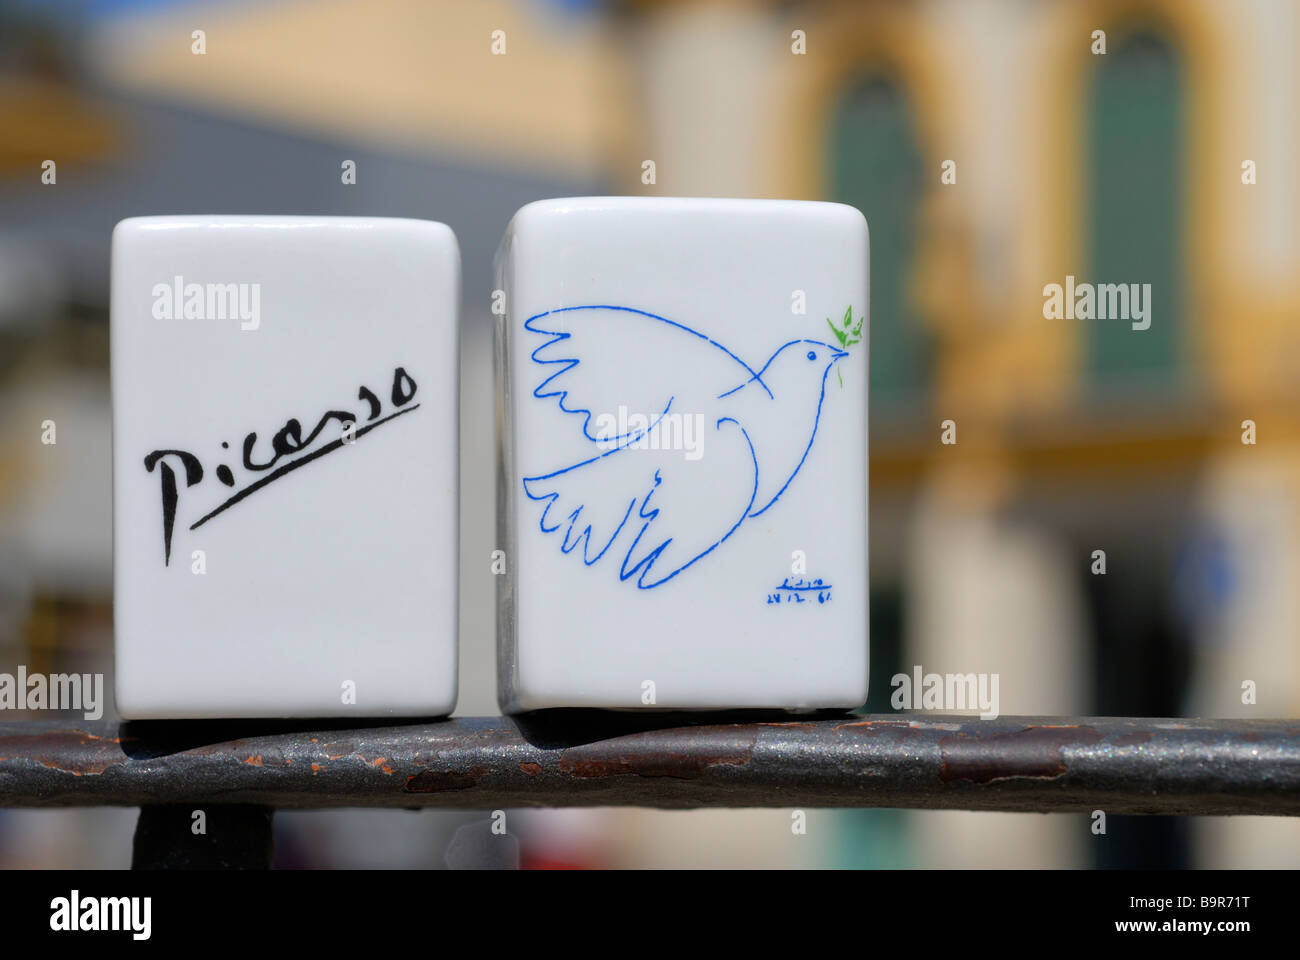 Souvenirs from Picasso Casa Natal, birth house in the background of the image. Ceramics Dove of Peace Stock Photo